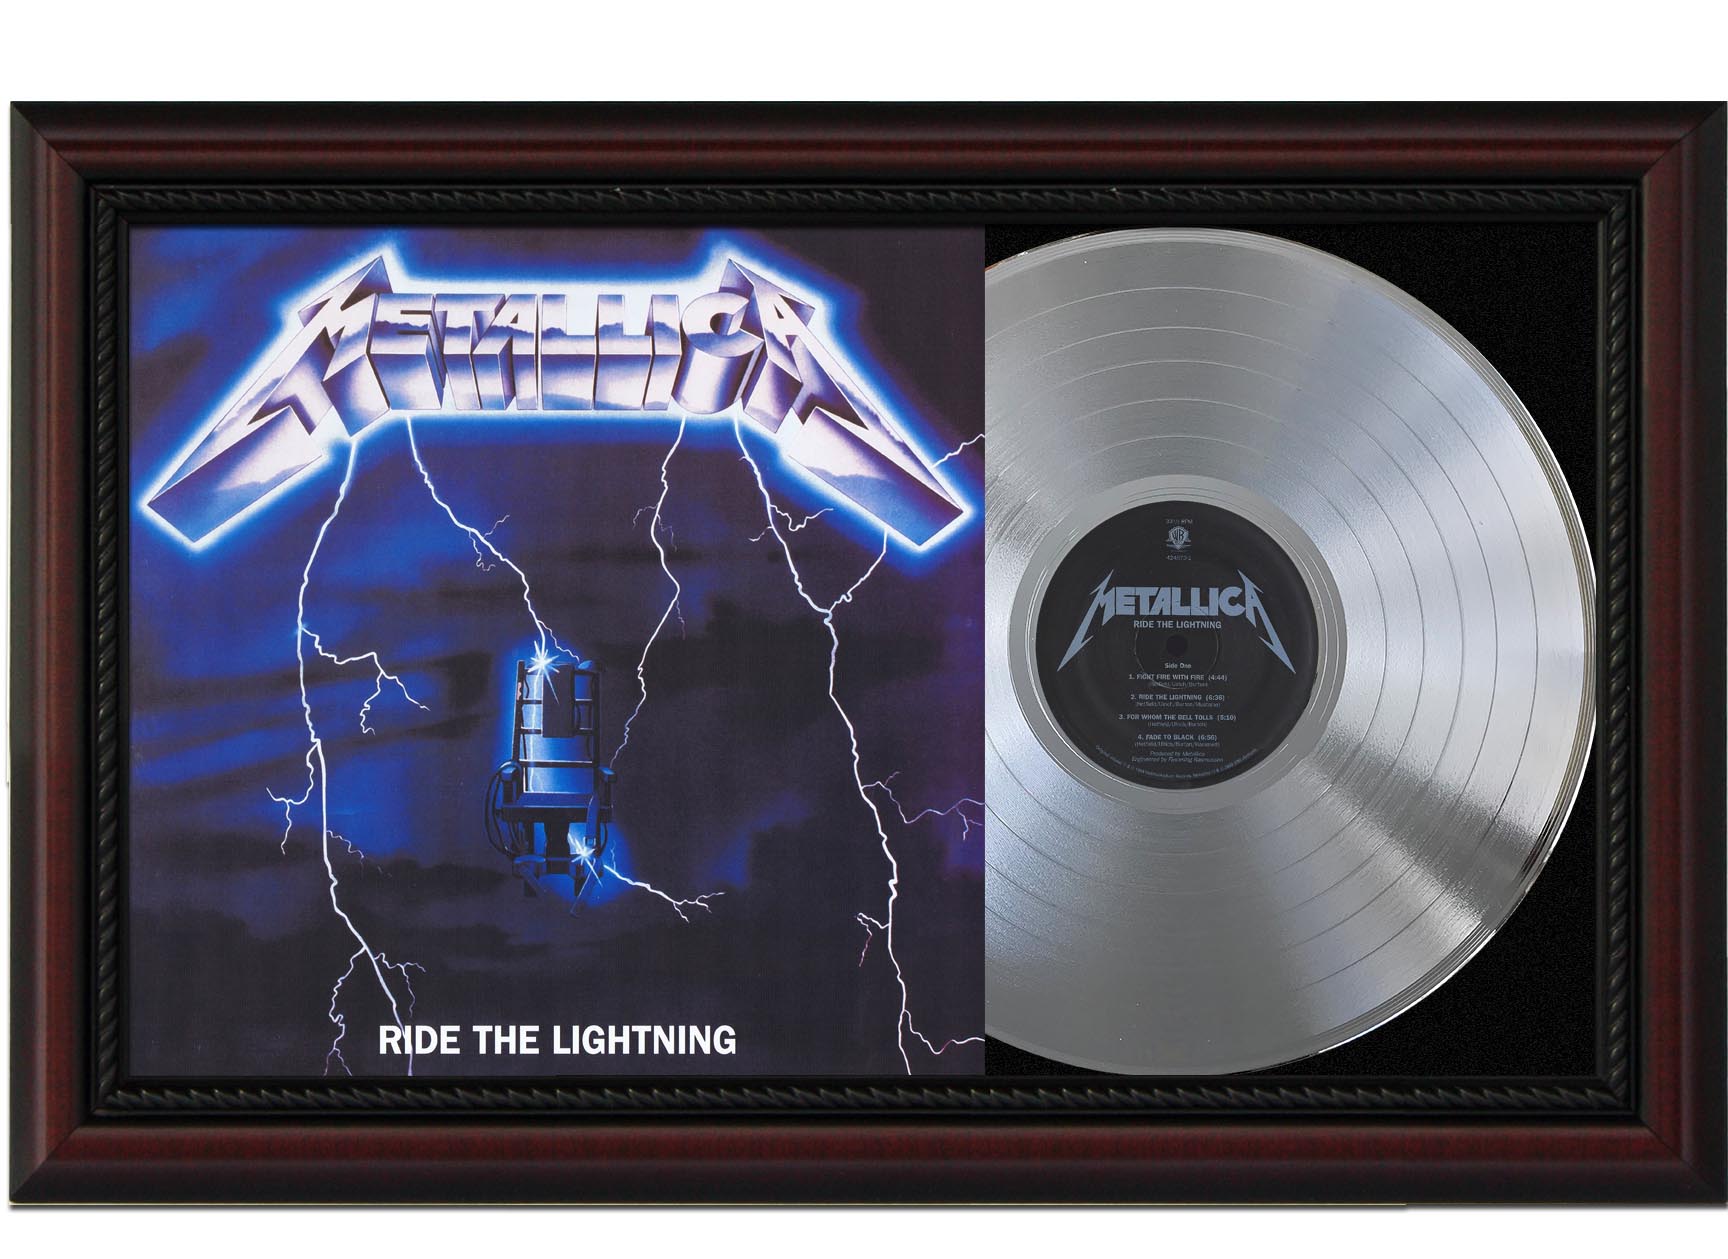 Metallica - Ride the Lightning Platinum LP Record Sleeve Display M4 - Gold  Record Outlet Album and Disc Collectible Memorabilia